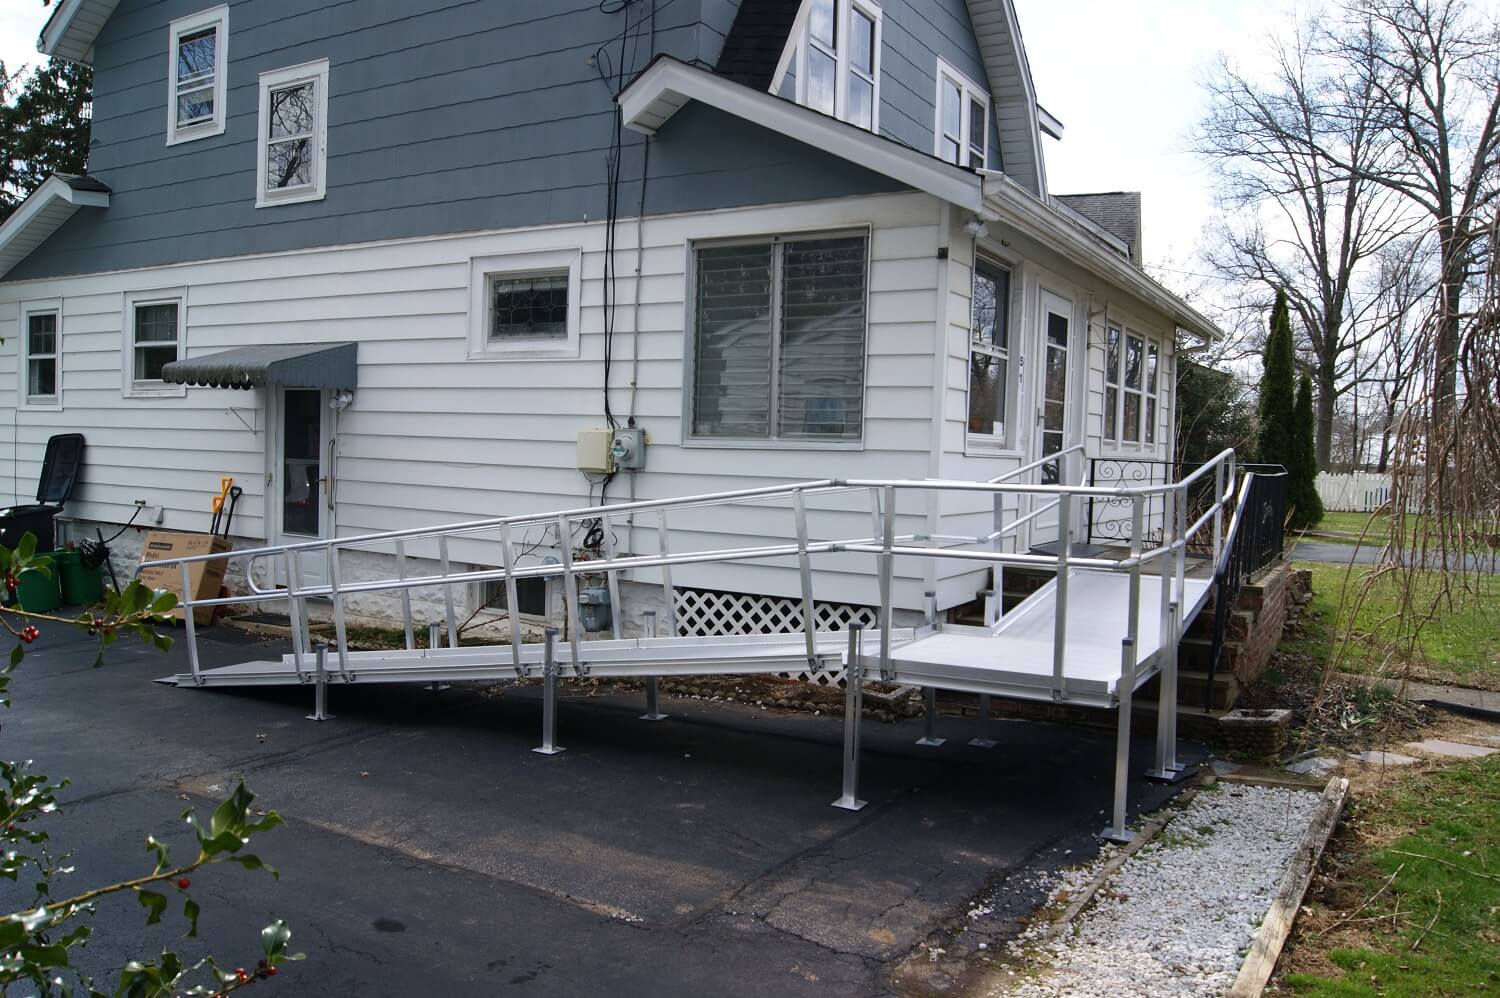 Ramp with a slope installed outside a home